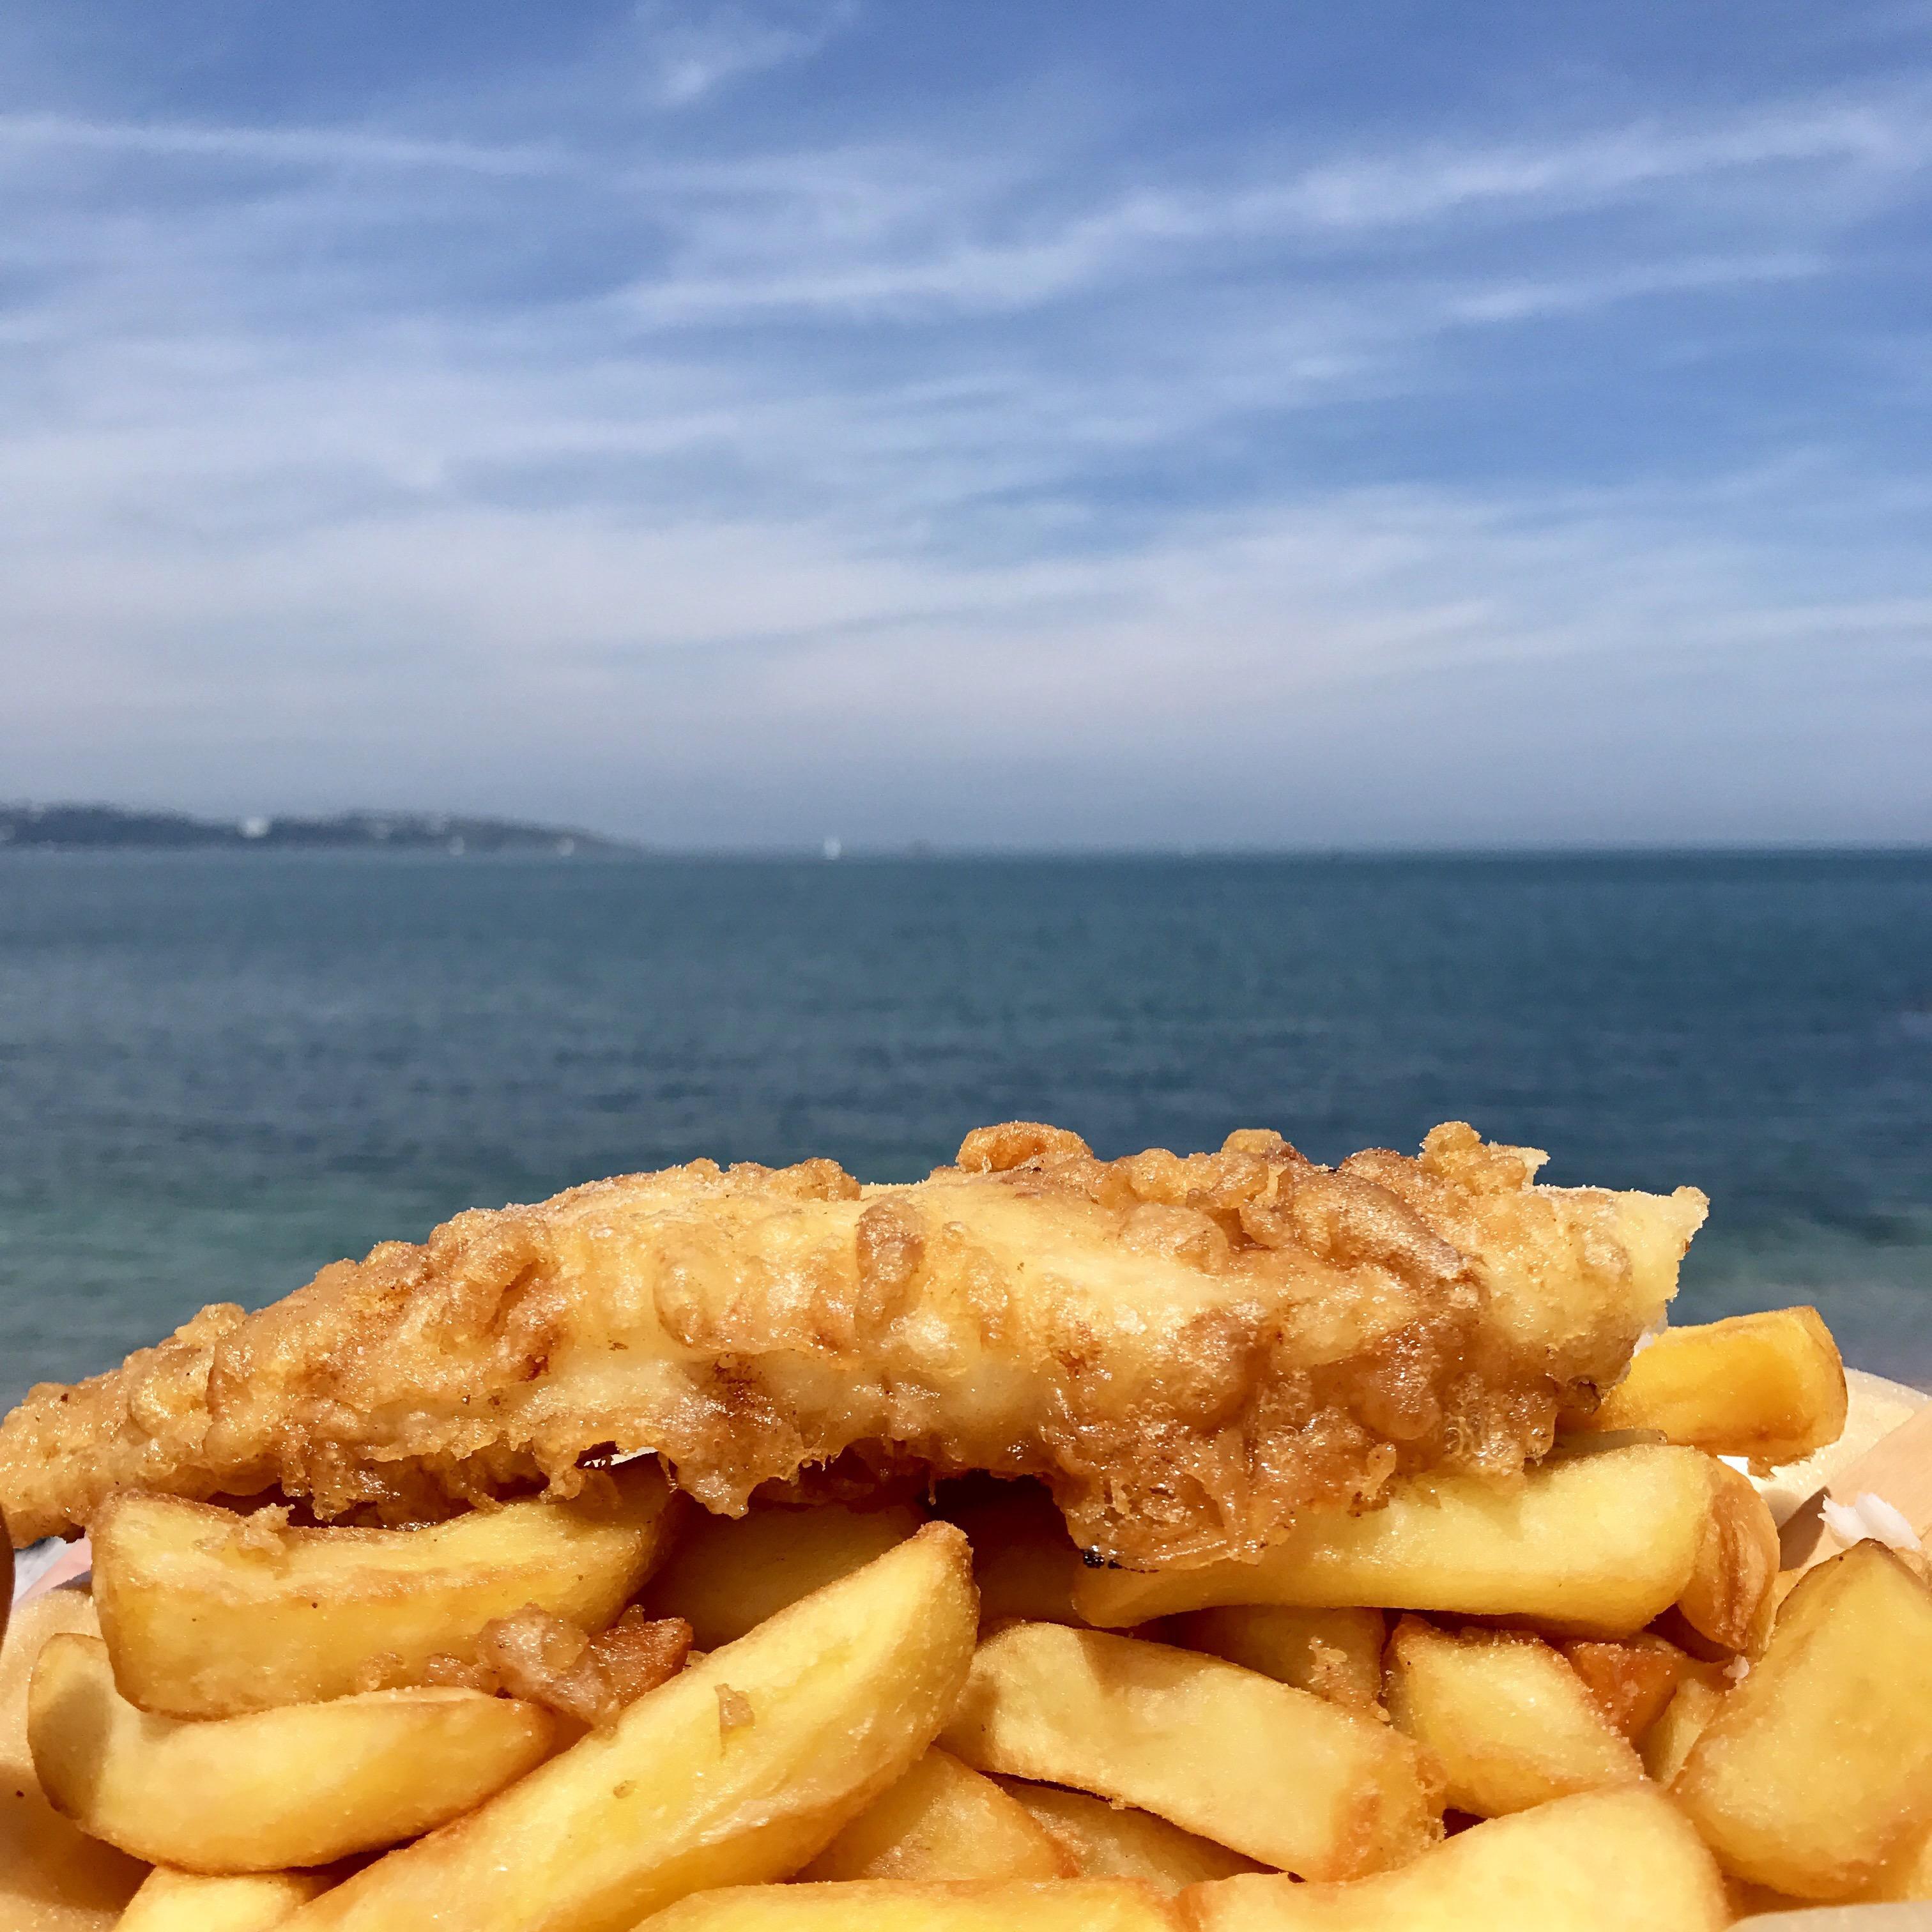 Fish and chips at the seaside